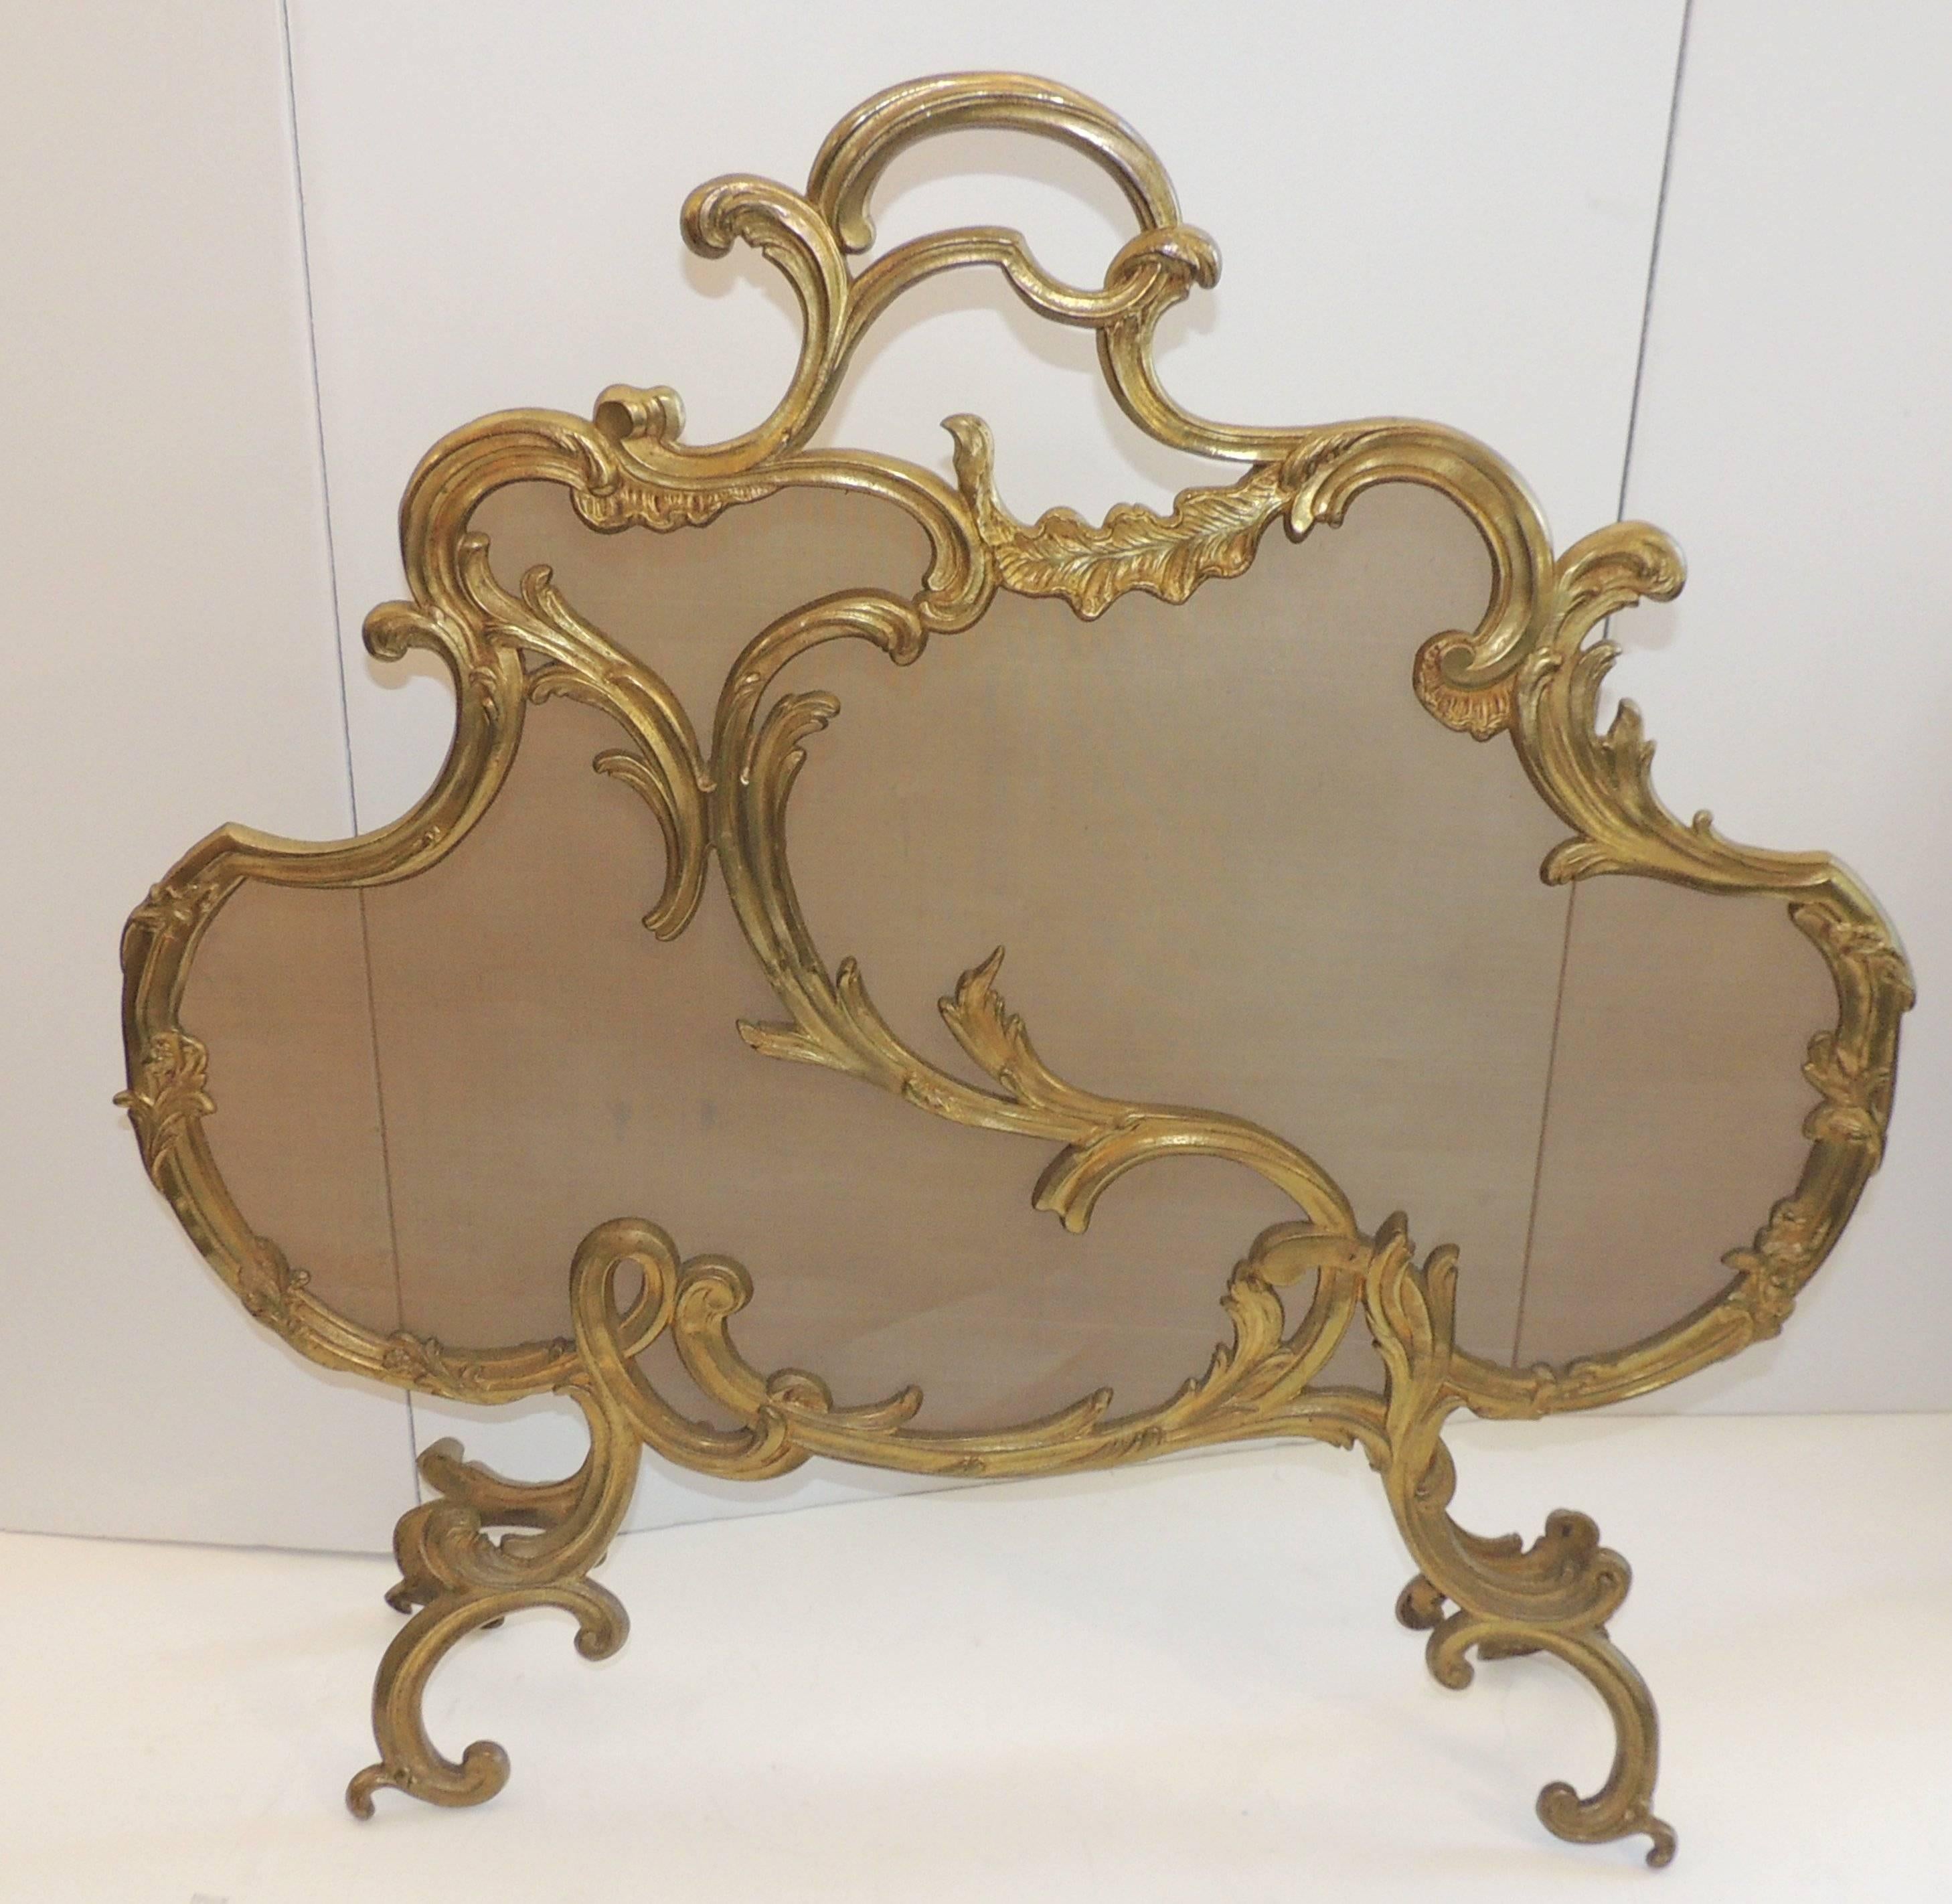 Wonderful vintage Rococo gilt bronze scroll fire place screen.

Measures: 29" H a 29" W.